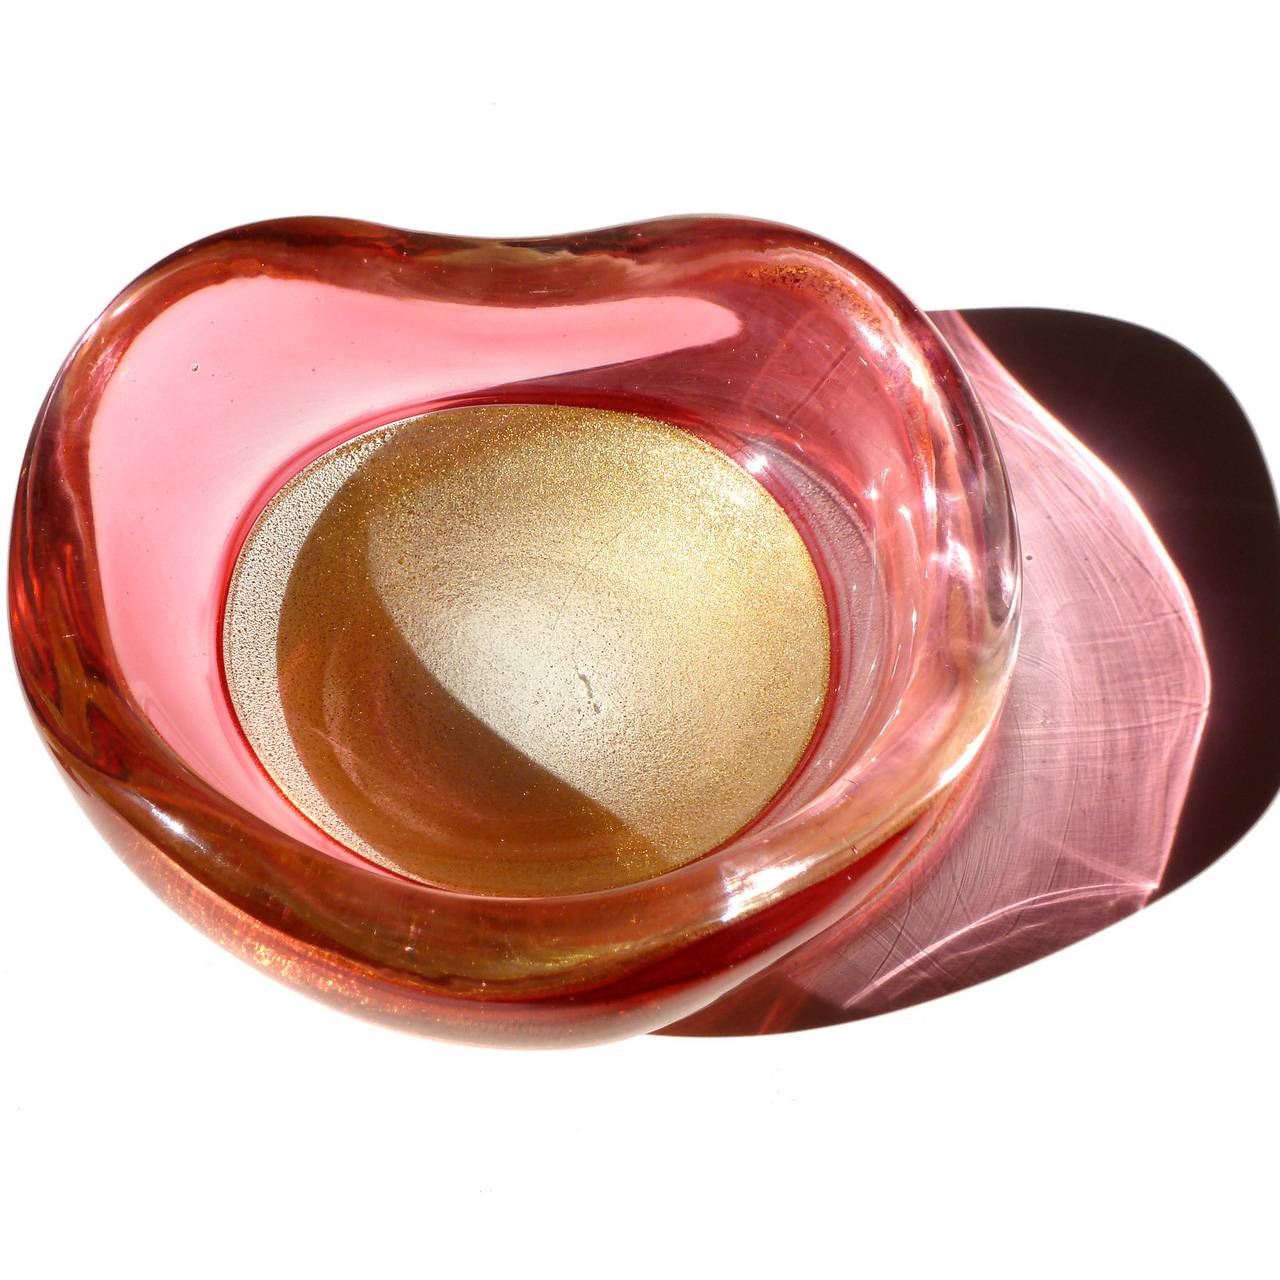 Free shipping worldwide! See details below description.

Gorgeous Murano handblown gold flecks and pink rim art glass decorative bowl. Documented to designer Archimede Seguso, circa 1950s, in the 